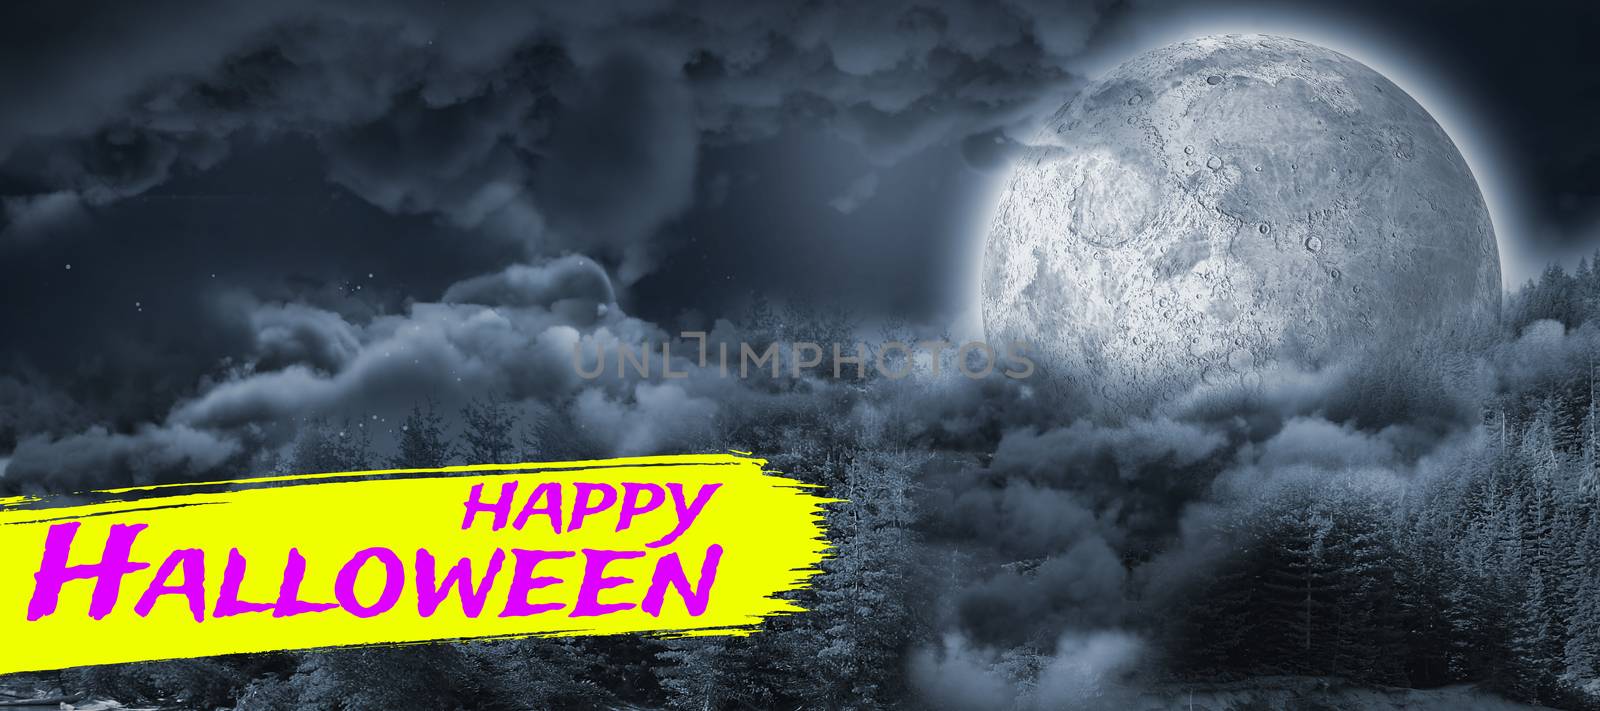 Digital image of happy Halloween text against landscape of lakefront hiding the moon 